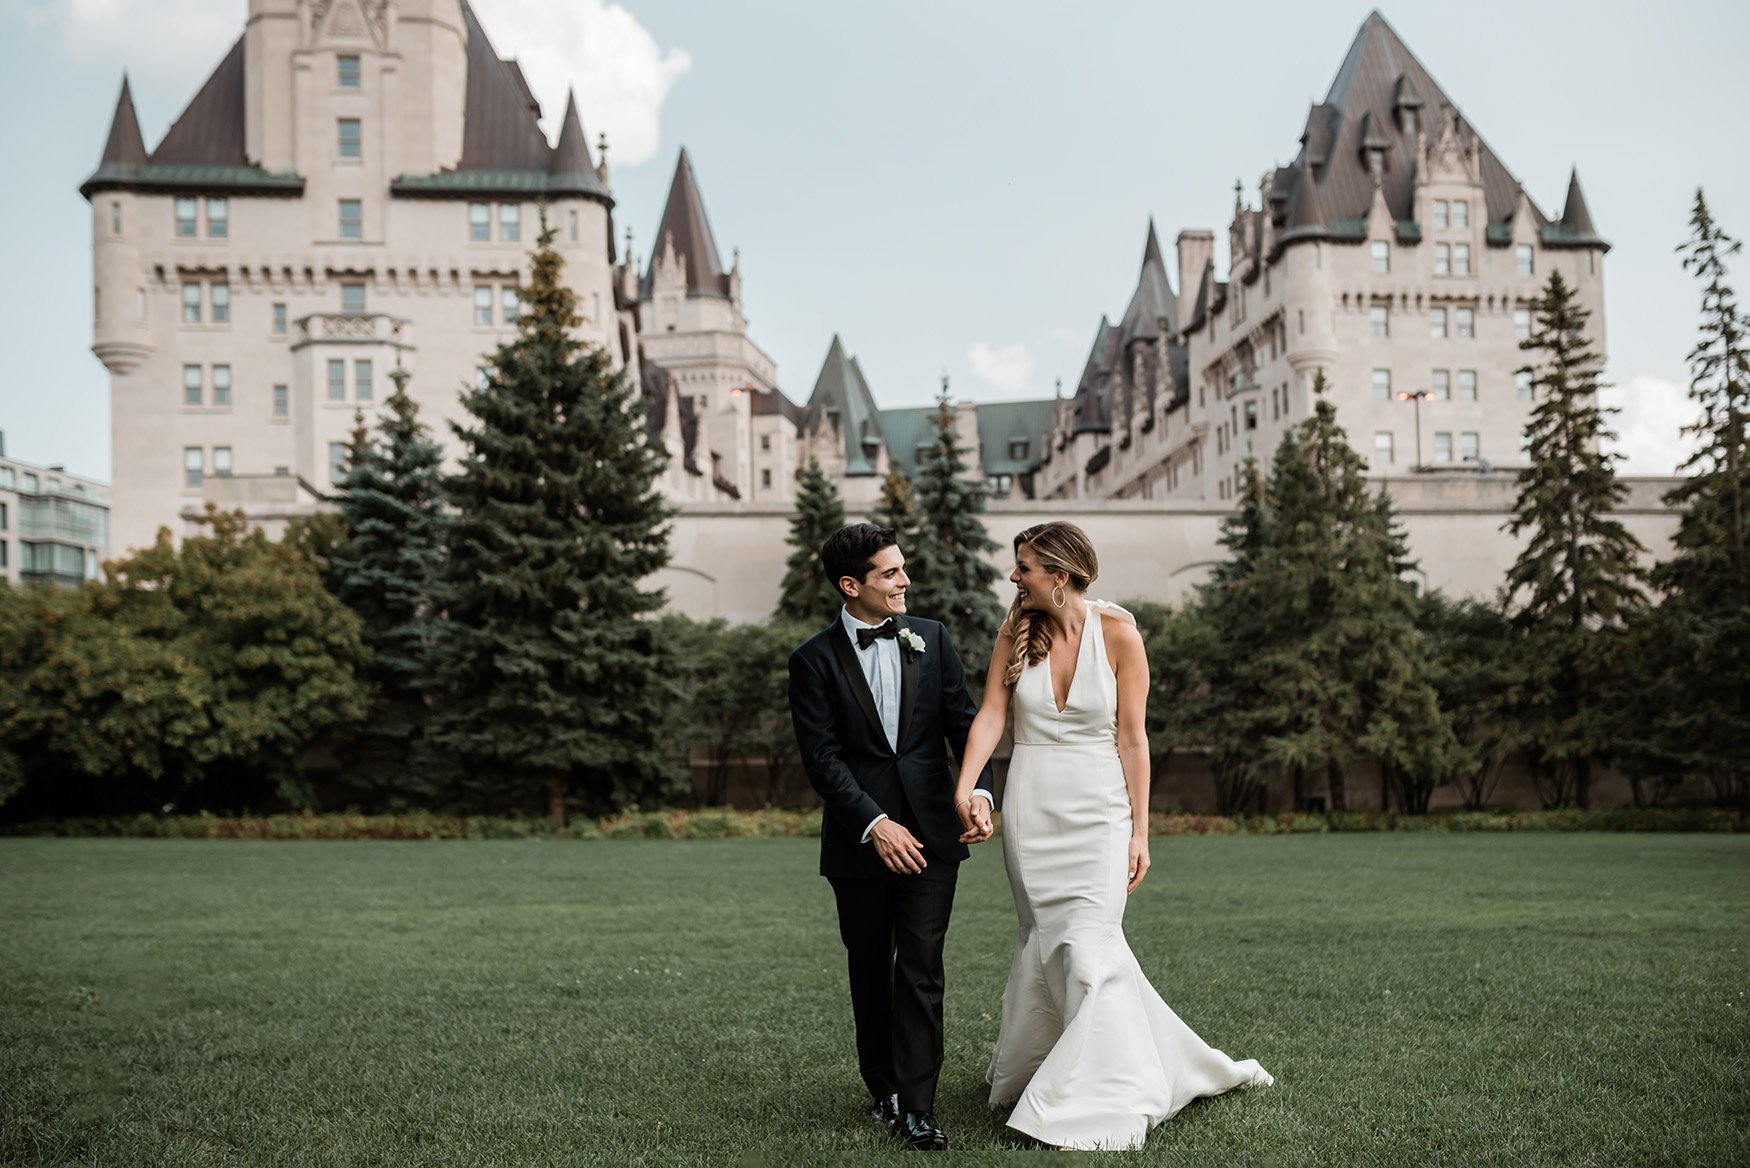 photo of a bride and groom walking in a park with chateau laurier in background (Copy)